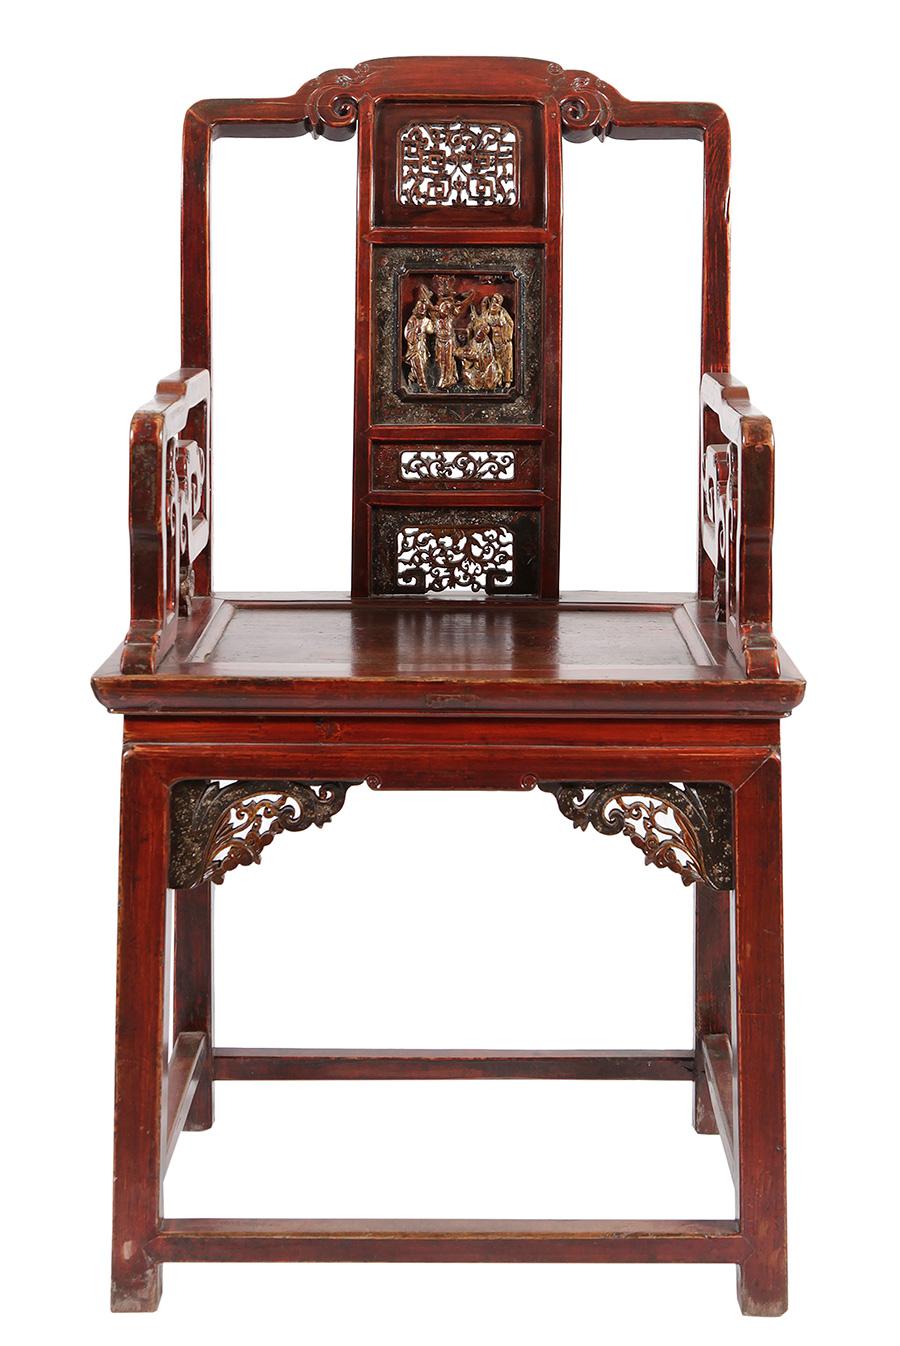 Available 4 pieces.
High back chair and arms made of lacquered wood decorated with traditional Chinese-inspired carvings. Note the lacquered compositions on the chambranas in the front, the shape of the legs, arms and backrest, the decorations of